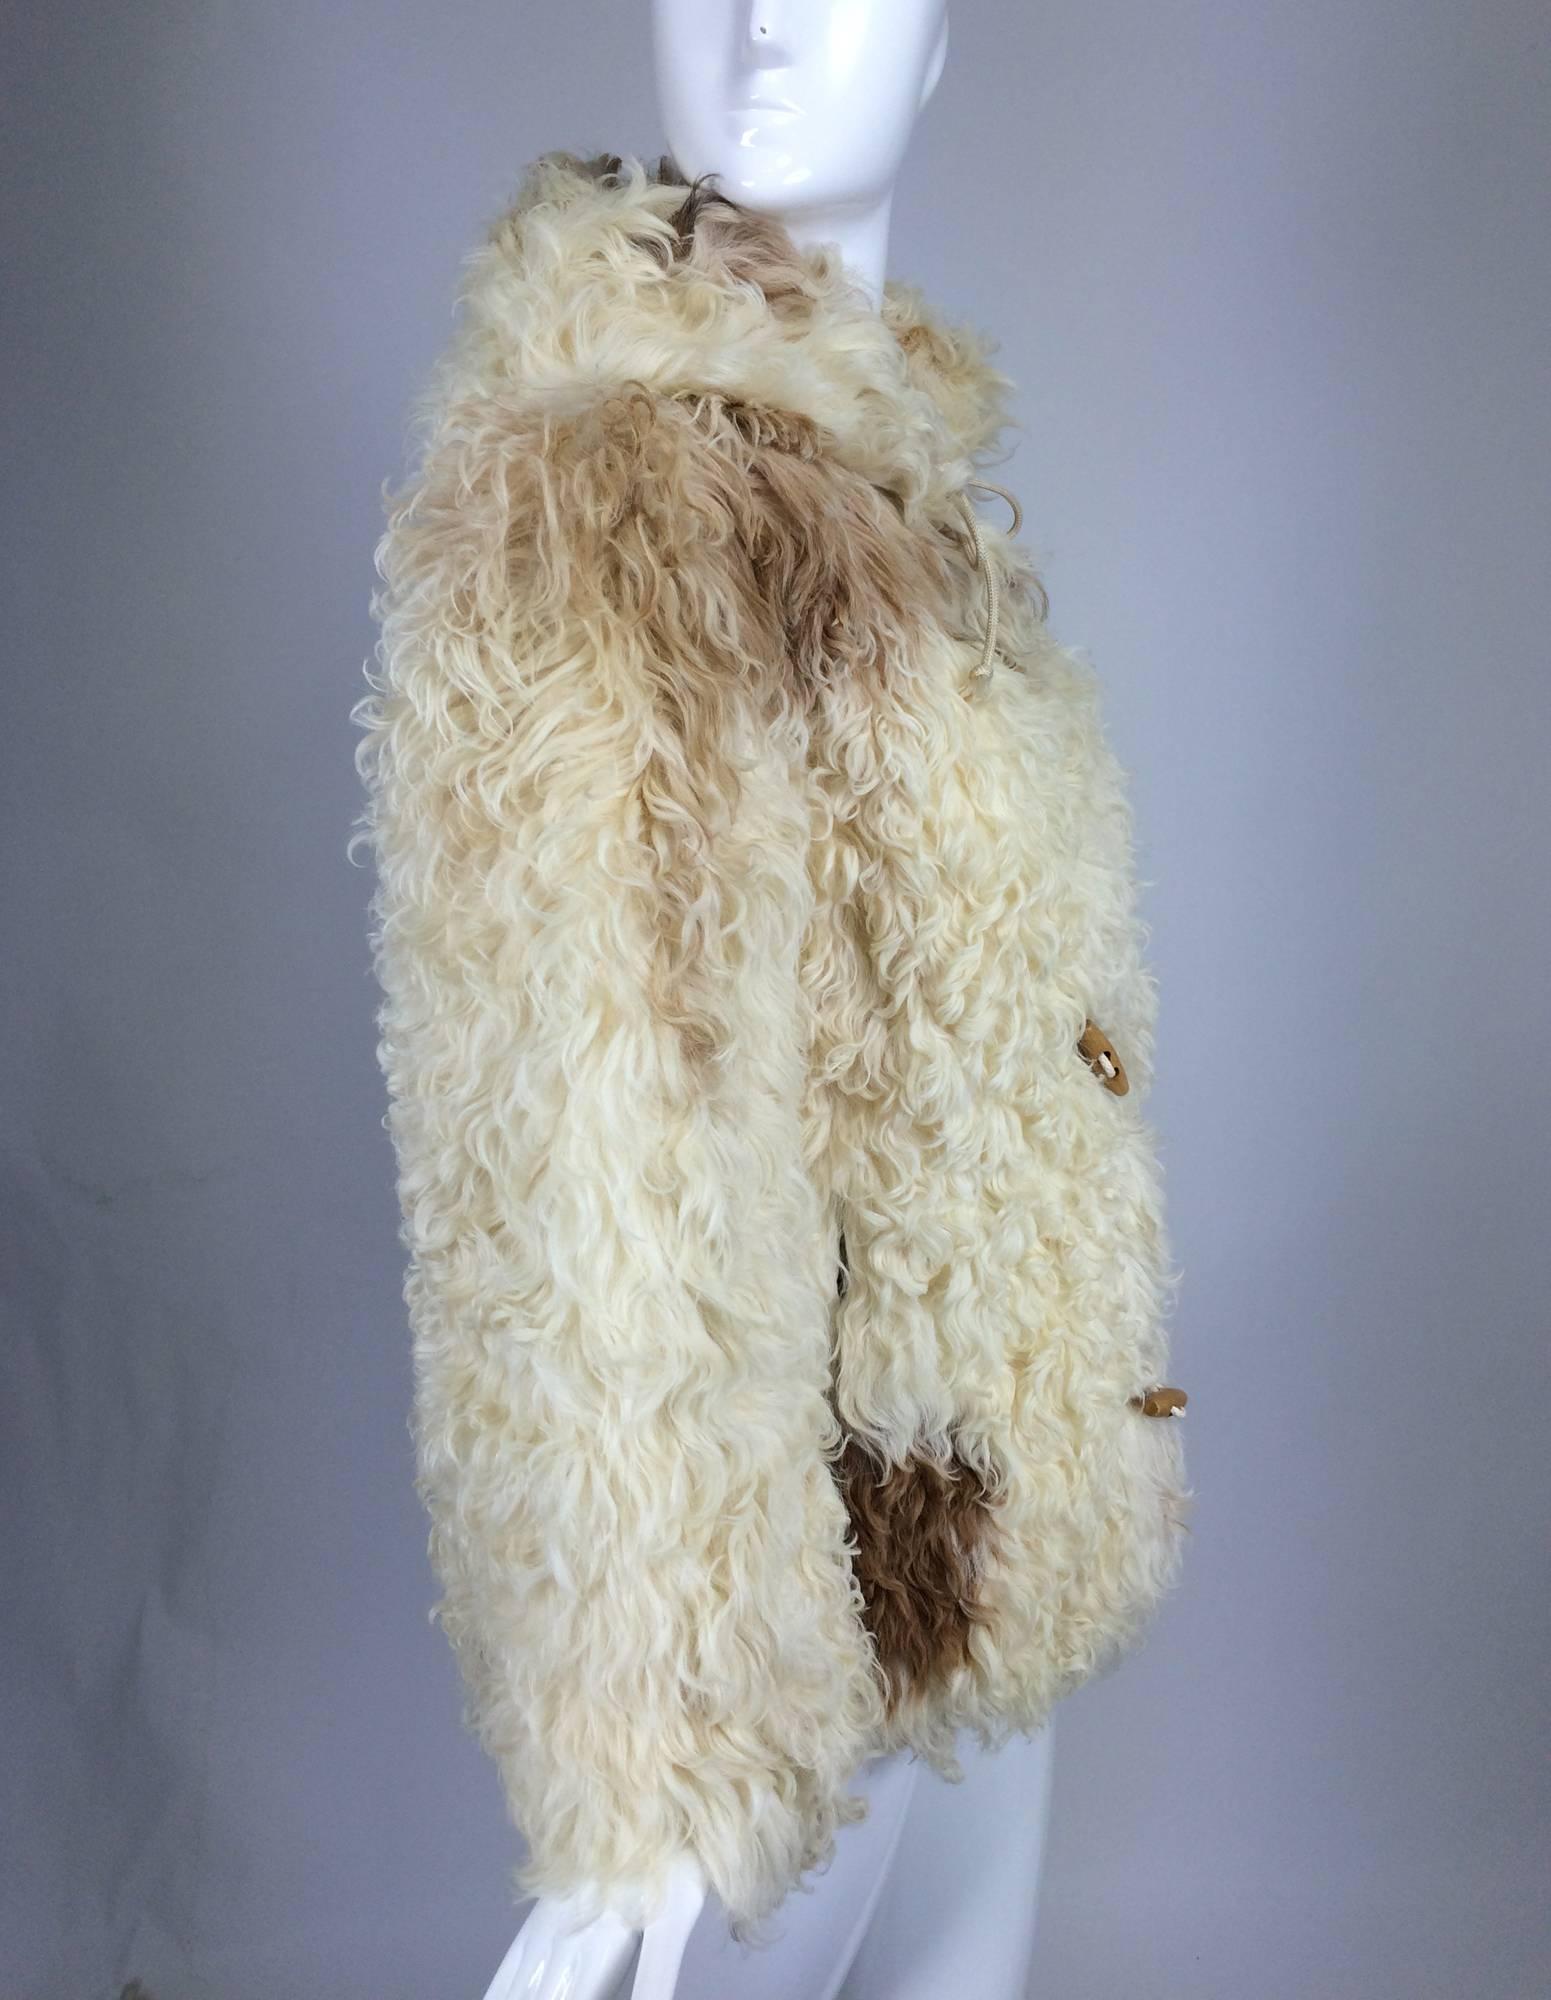 Mongolian lamb cream & tan hooded toggle parka jacket 1960s...Shaggy, cream & tan fur hooded jacket...Long sleeves, front pockets, attached hood with draw cord closure at the neck front...Closes with cord & wooden toggles at the front...The coat is